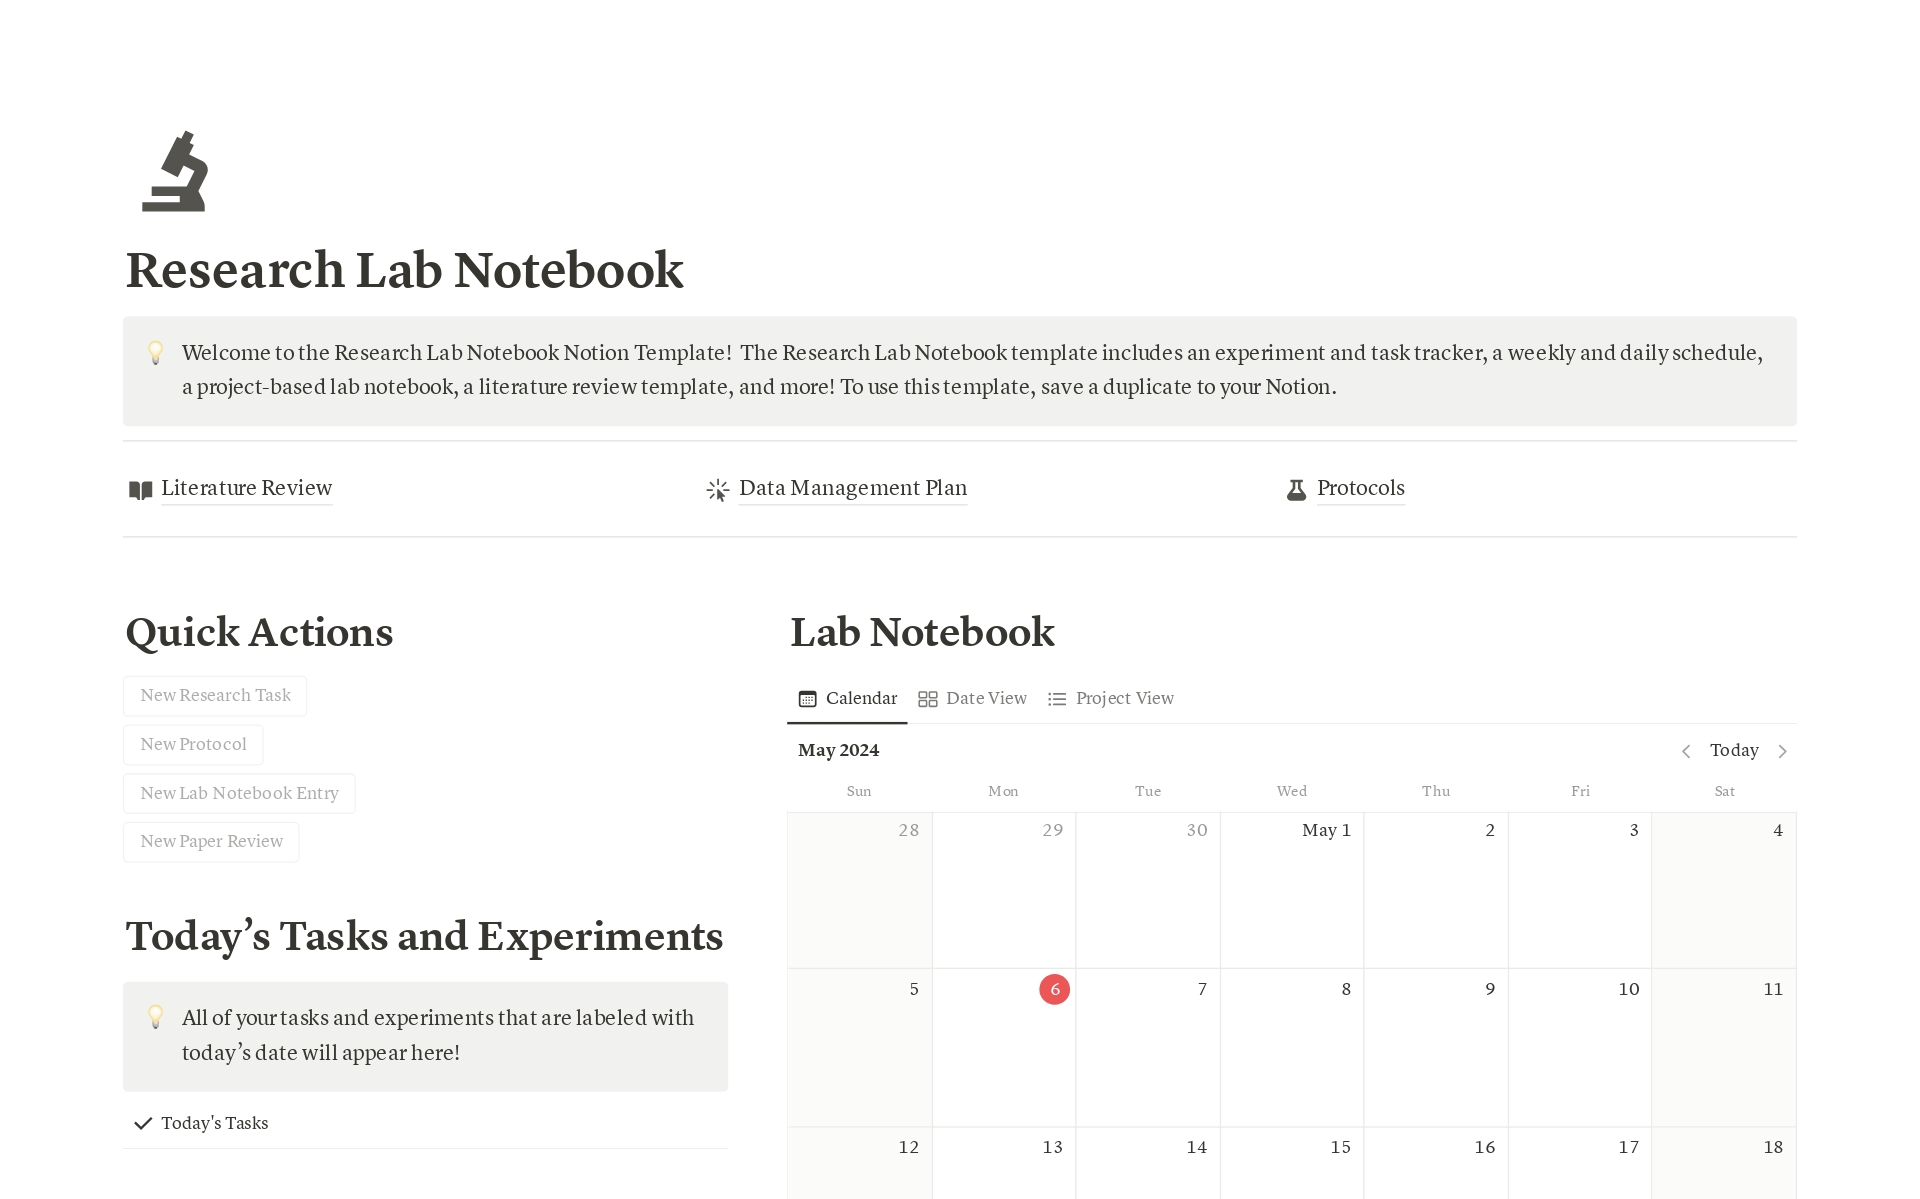 This template helps researches keep all their laboratory experiments, data, and results organized.